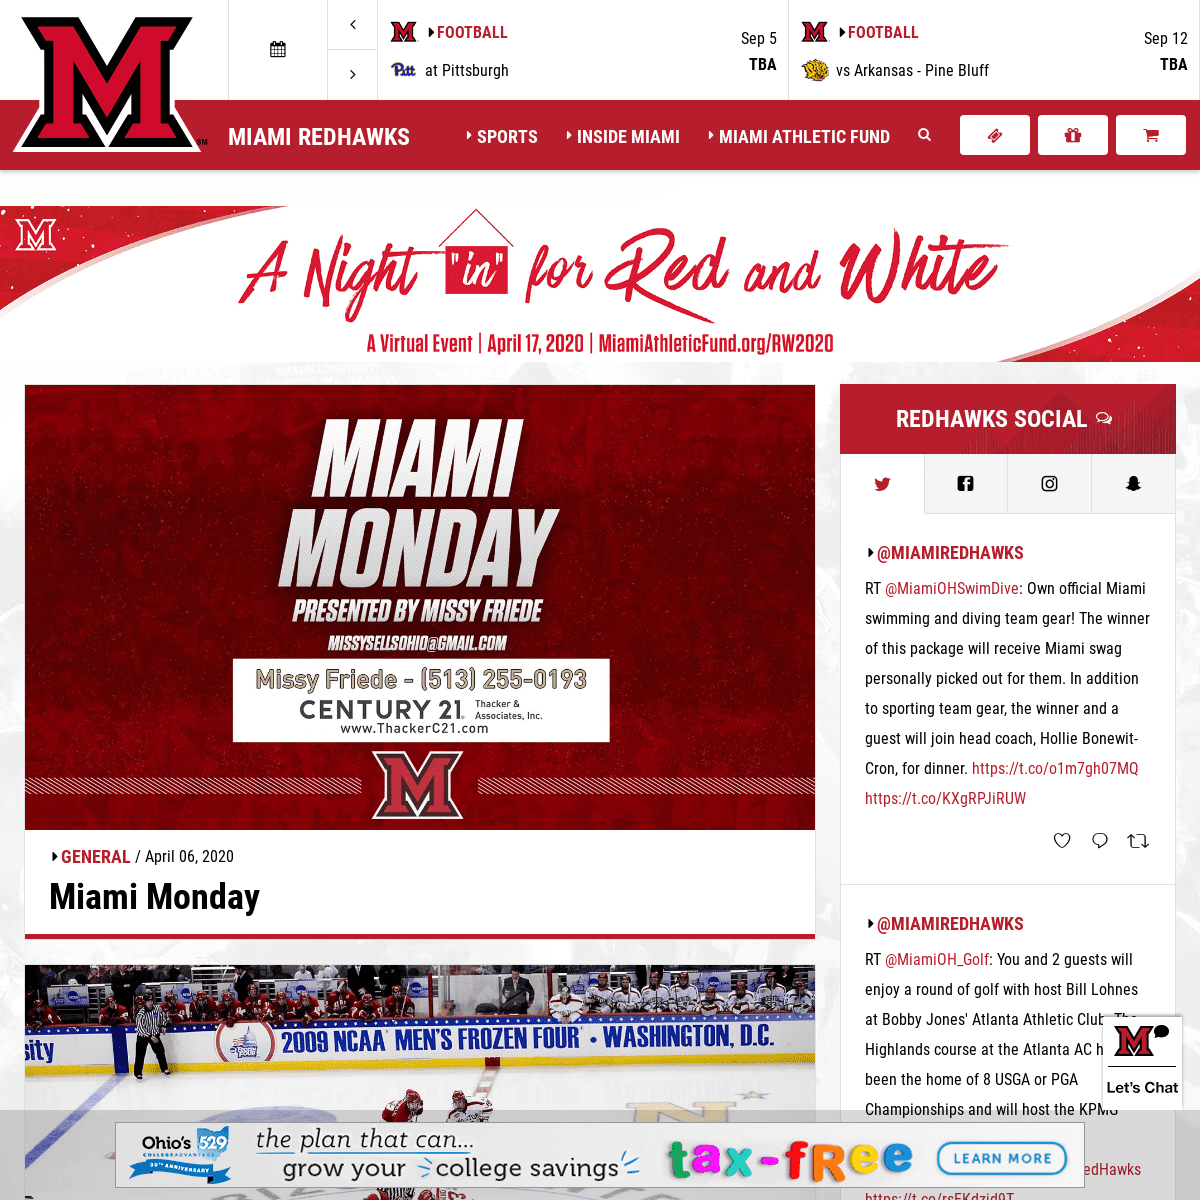 A complete backup of miamiredhawks.com